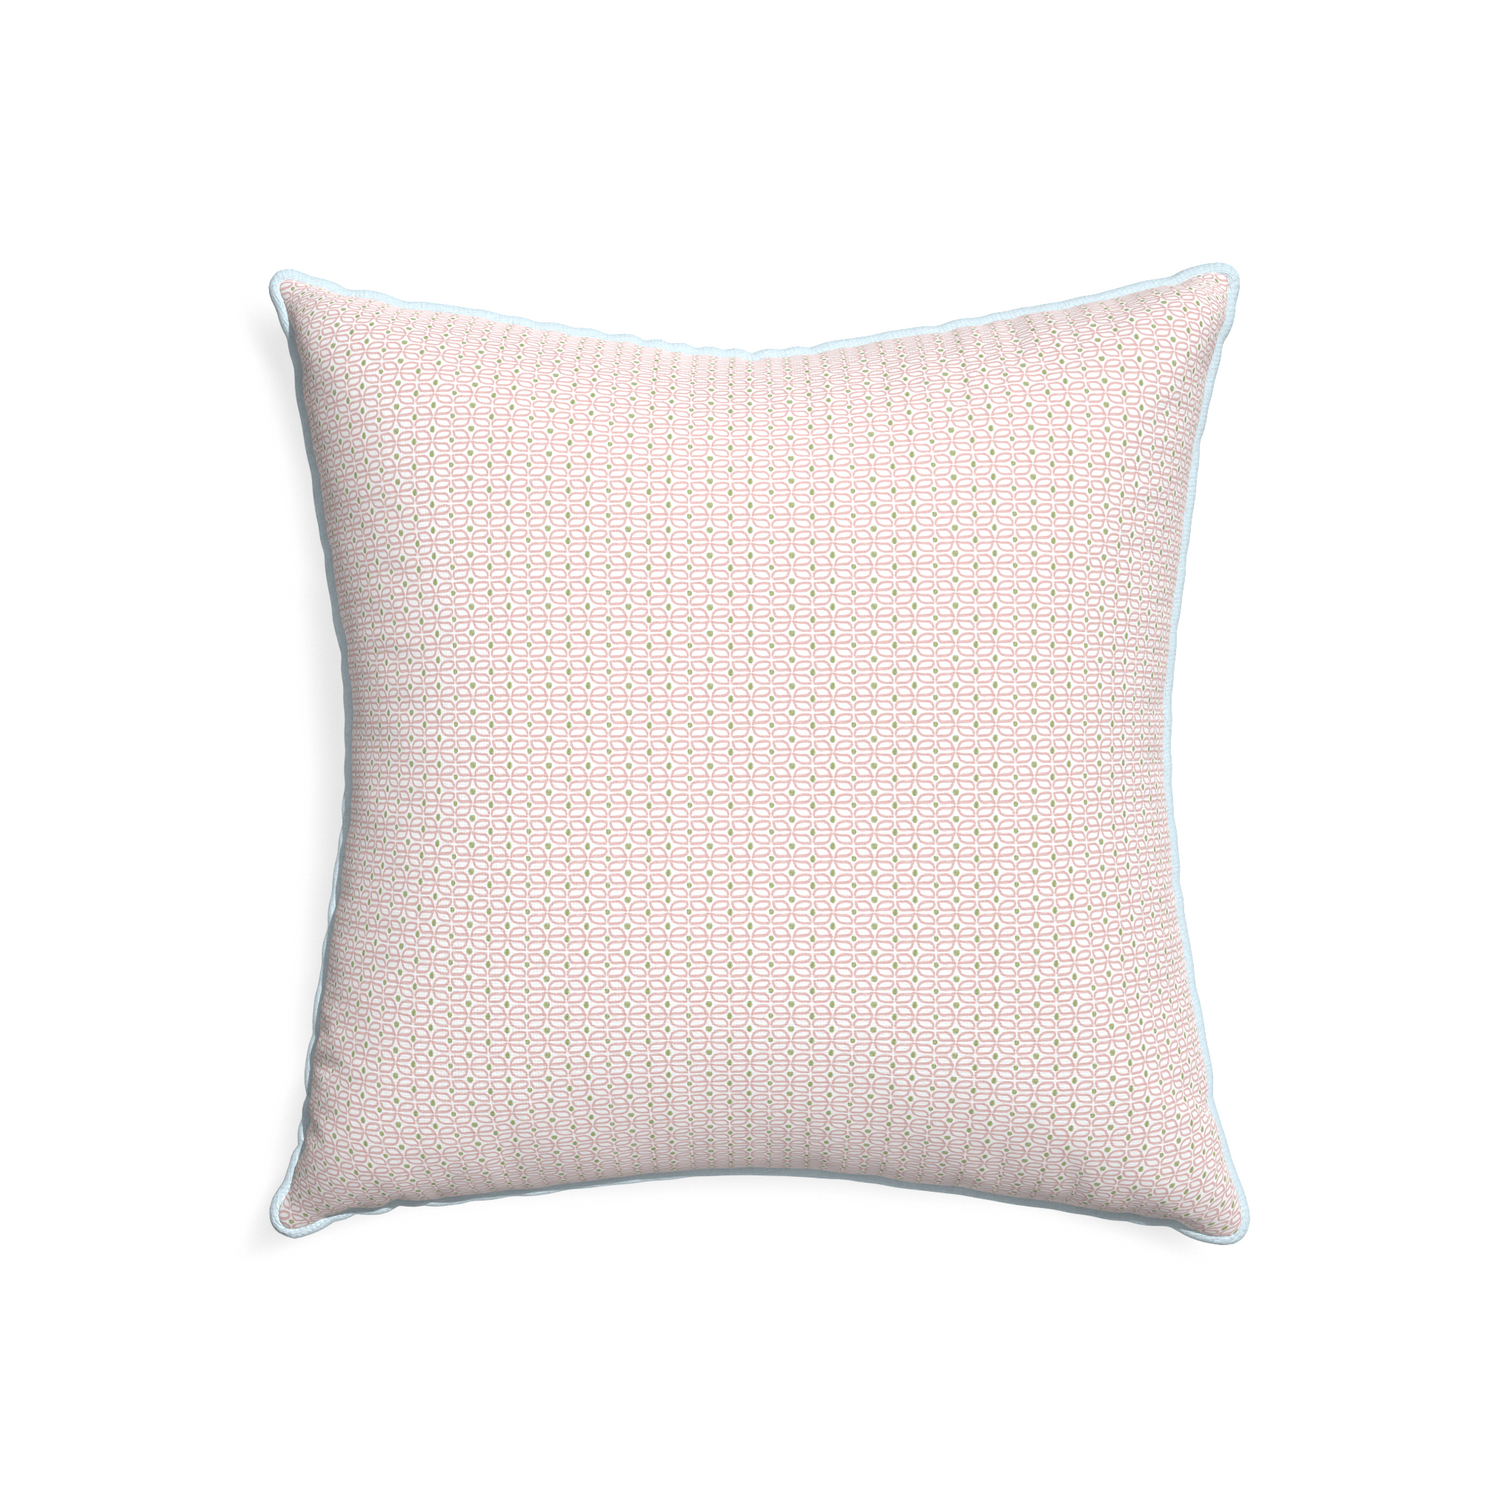 22-square loomi pink custom pink geometricpillow with powder piping on white background